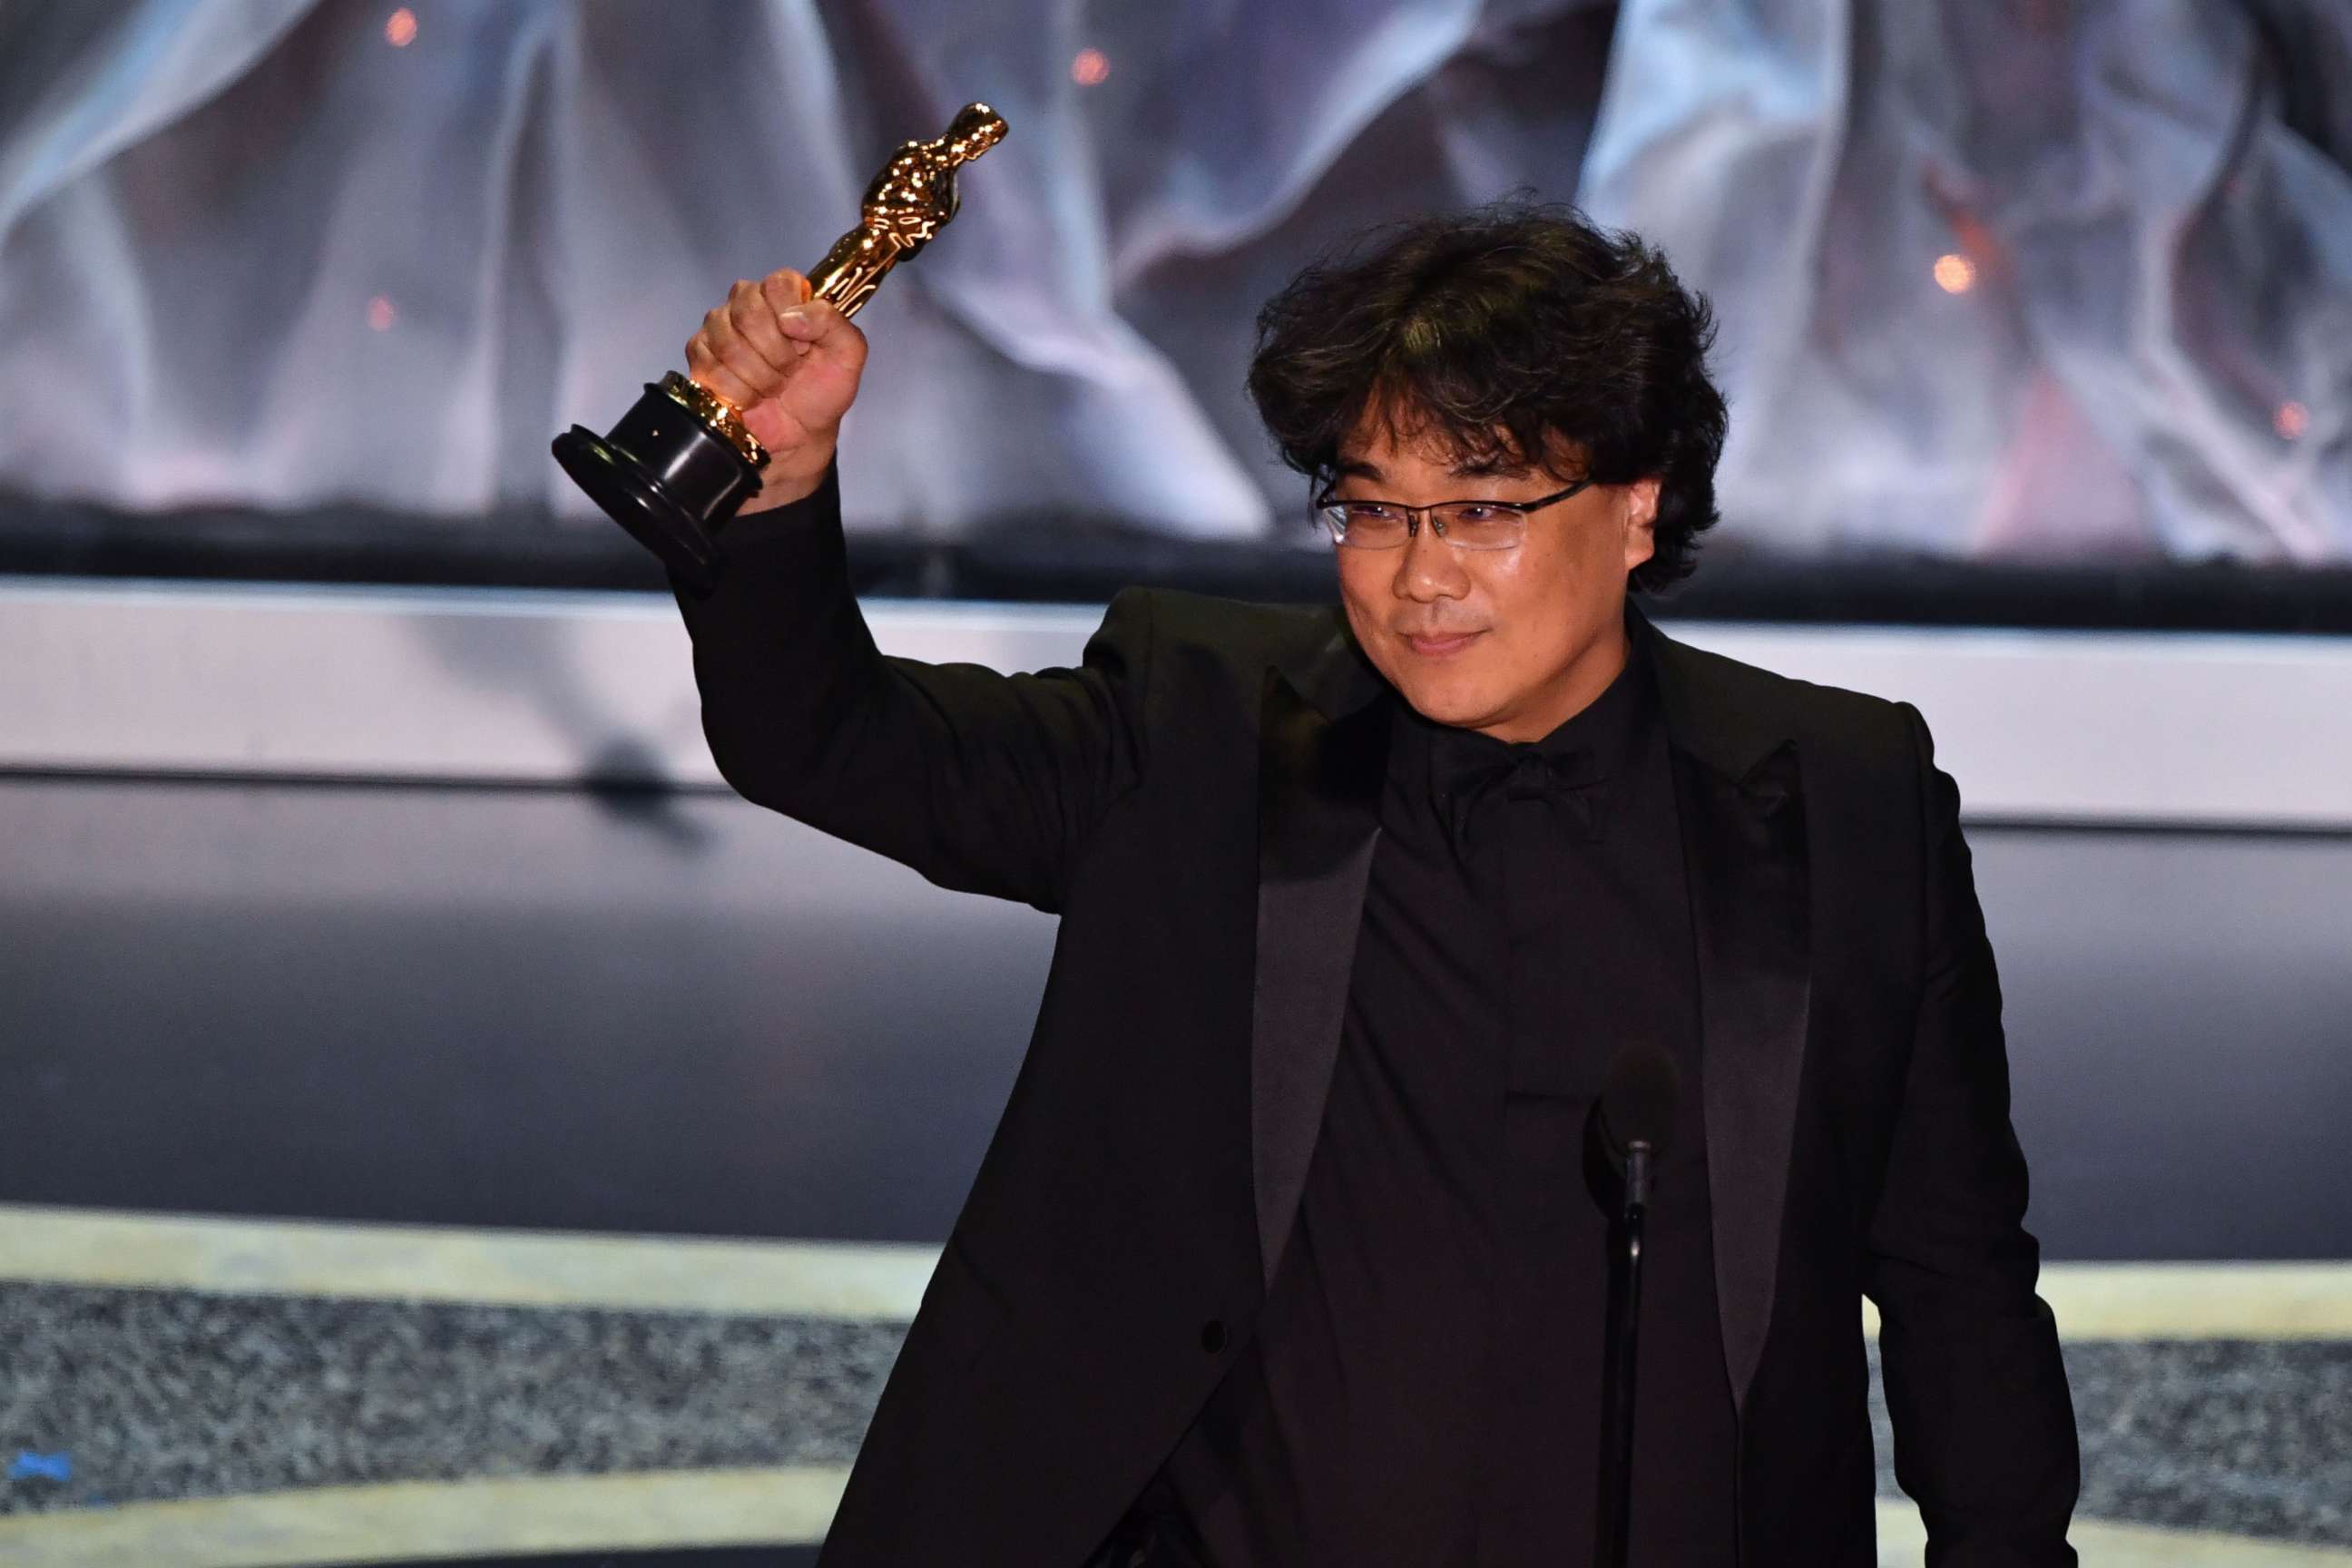 PHOTO: South Korean director Bong Joon-ho accepts the award for Best International Feature Film for "Parasite" during the 92nd Oscars at the Dolby Theatre in Hollywood, Calif., Feb. 9, 2020.